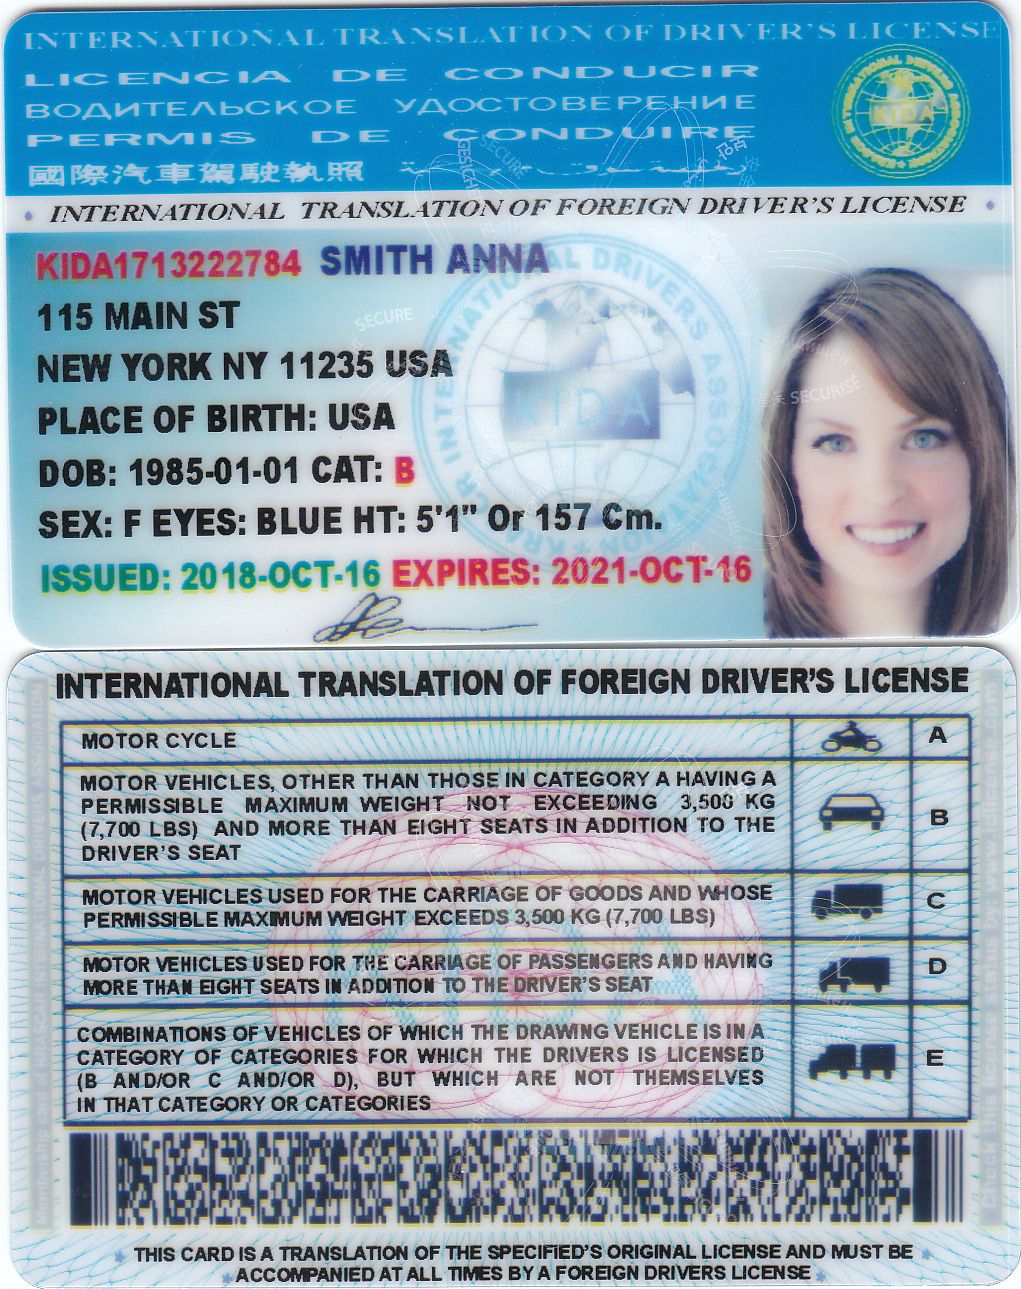 driving in maryland with international drivers license